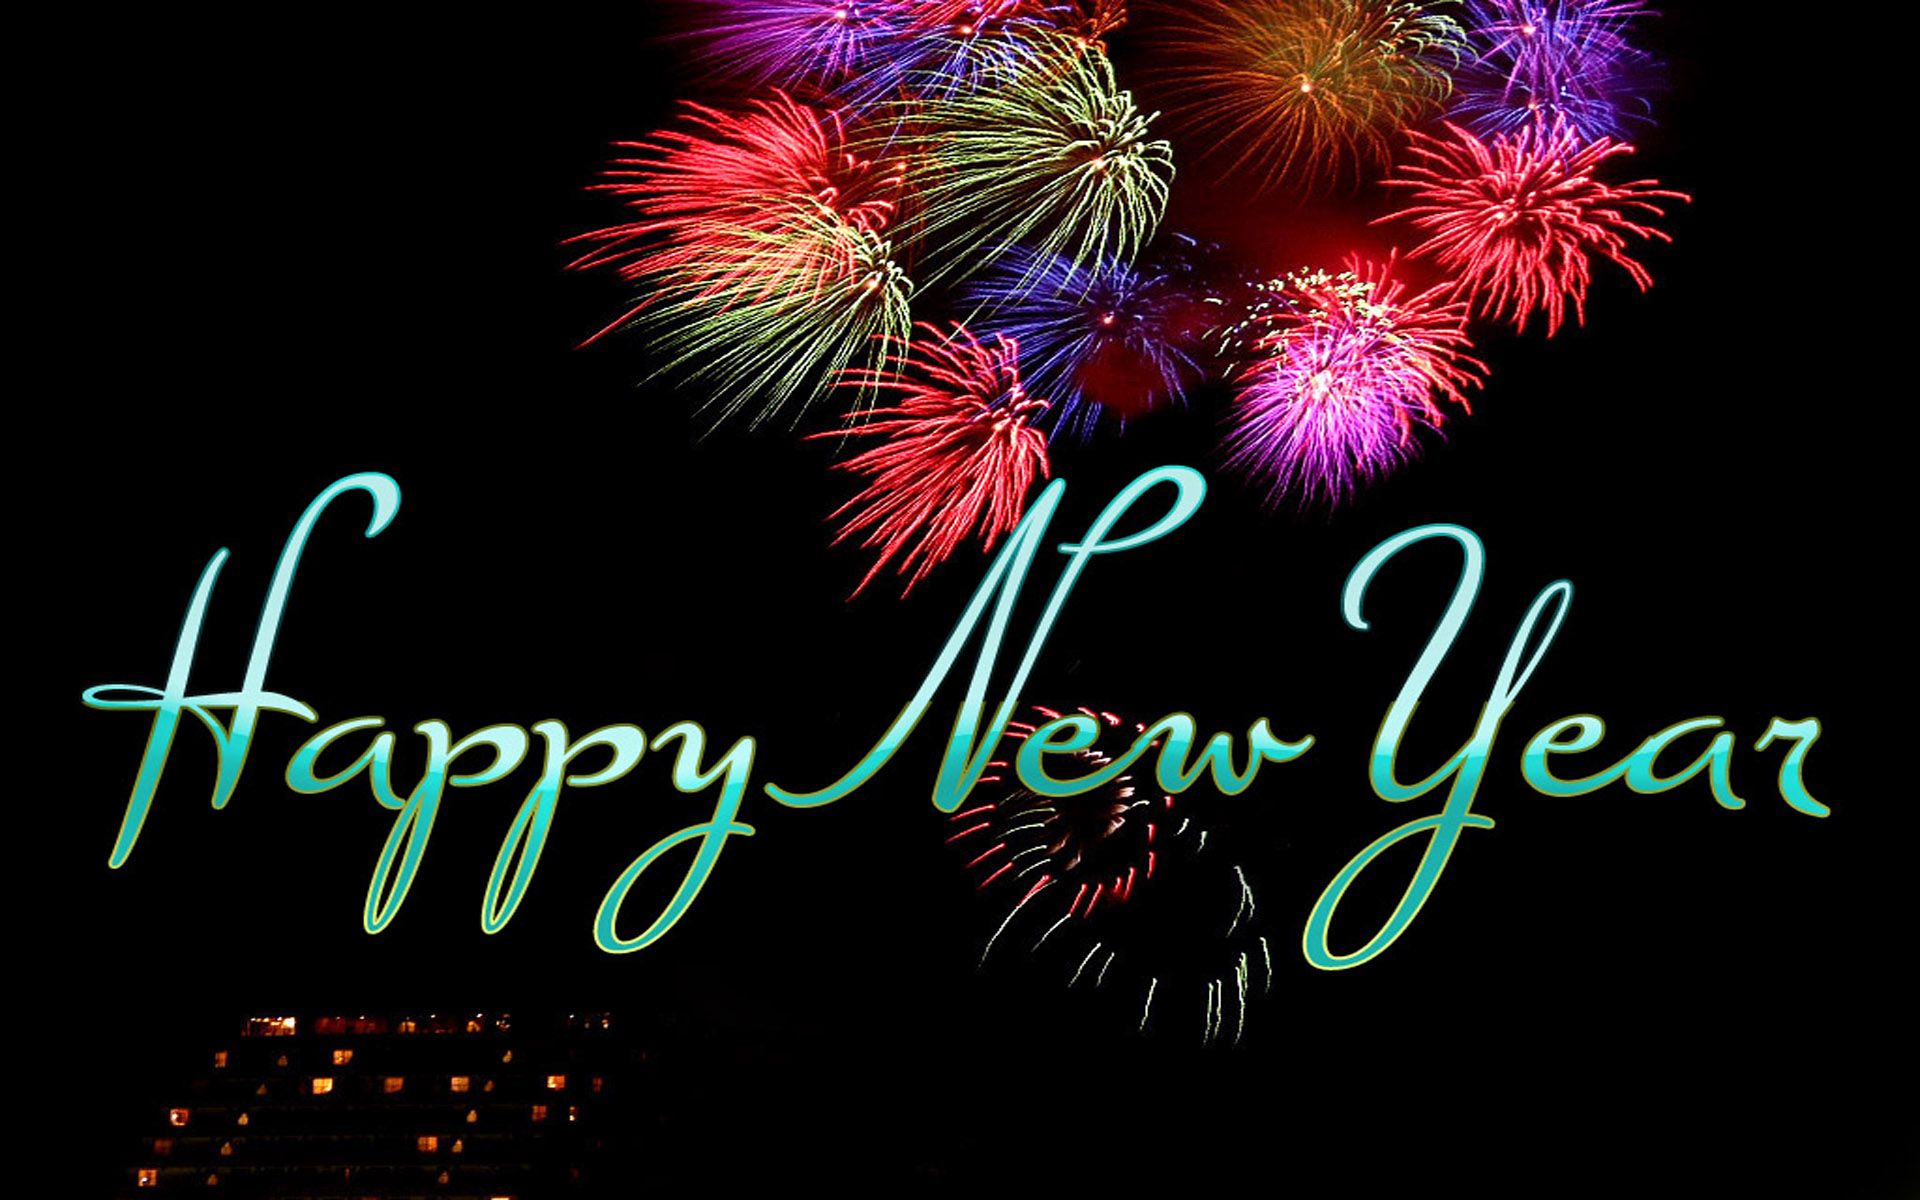 Happy New Year Wallpaper HD free download